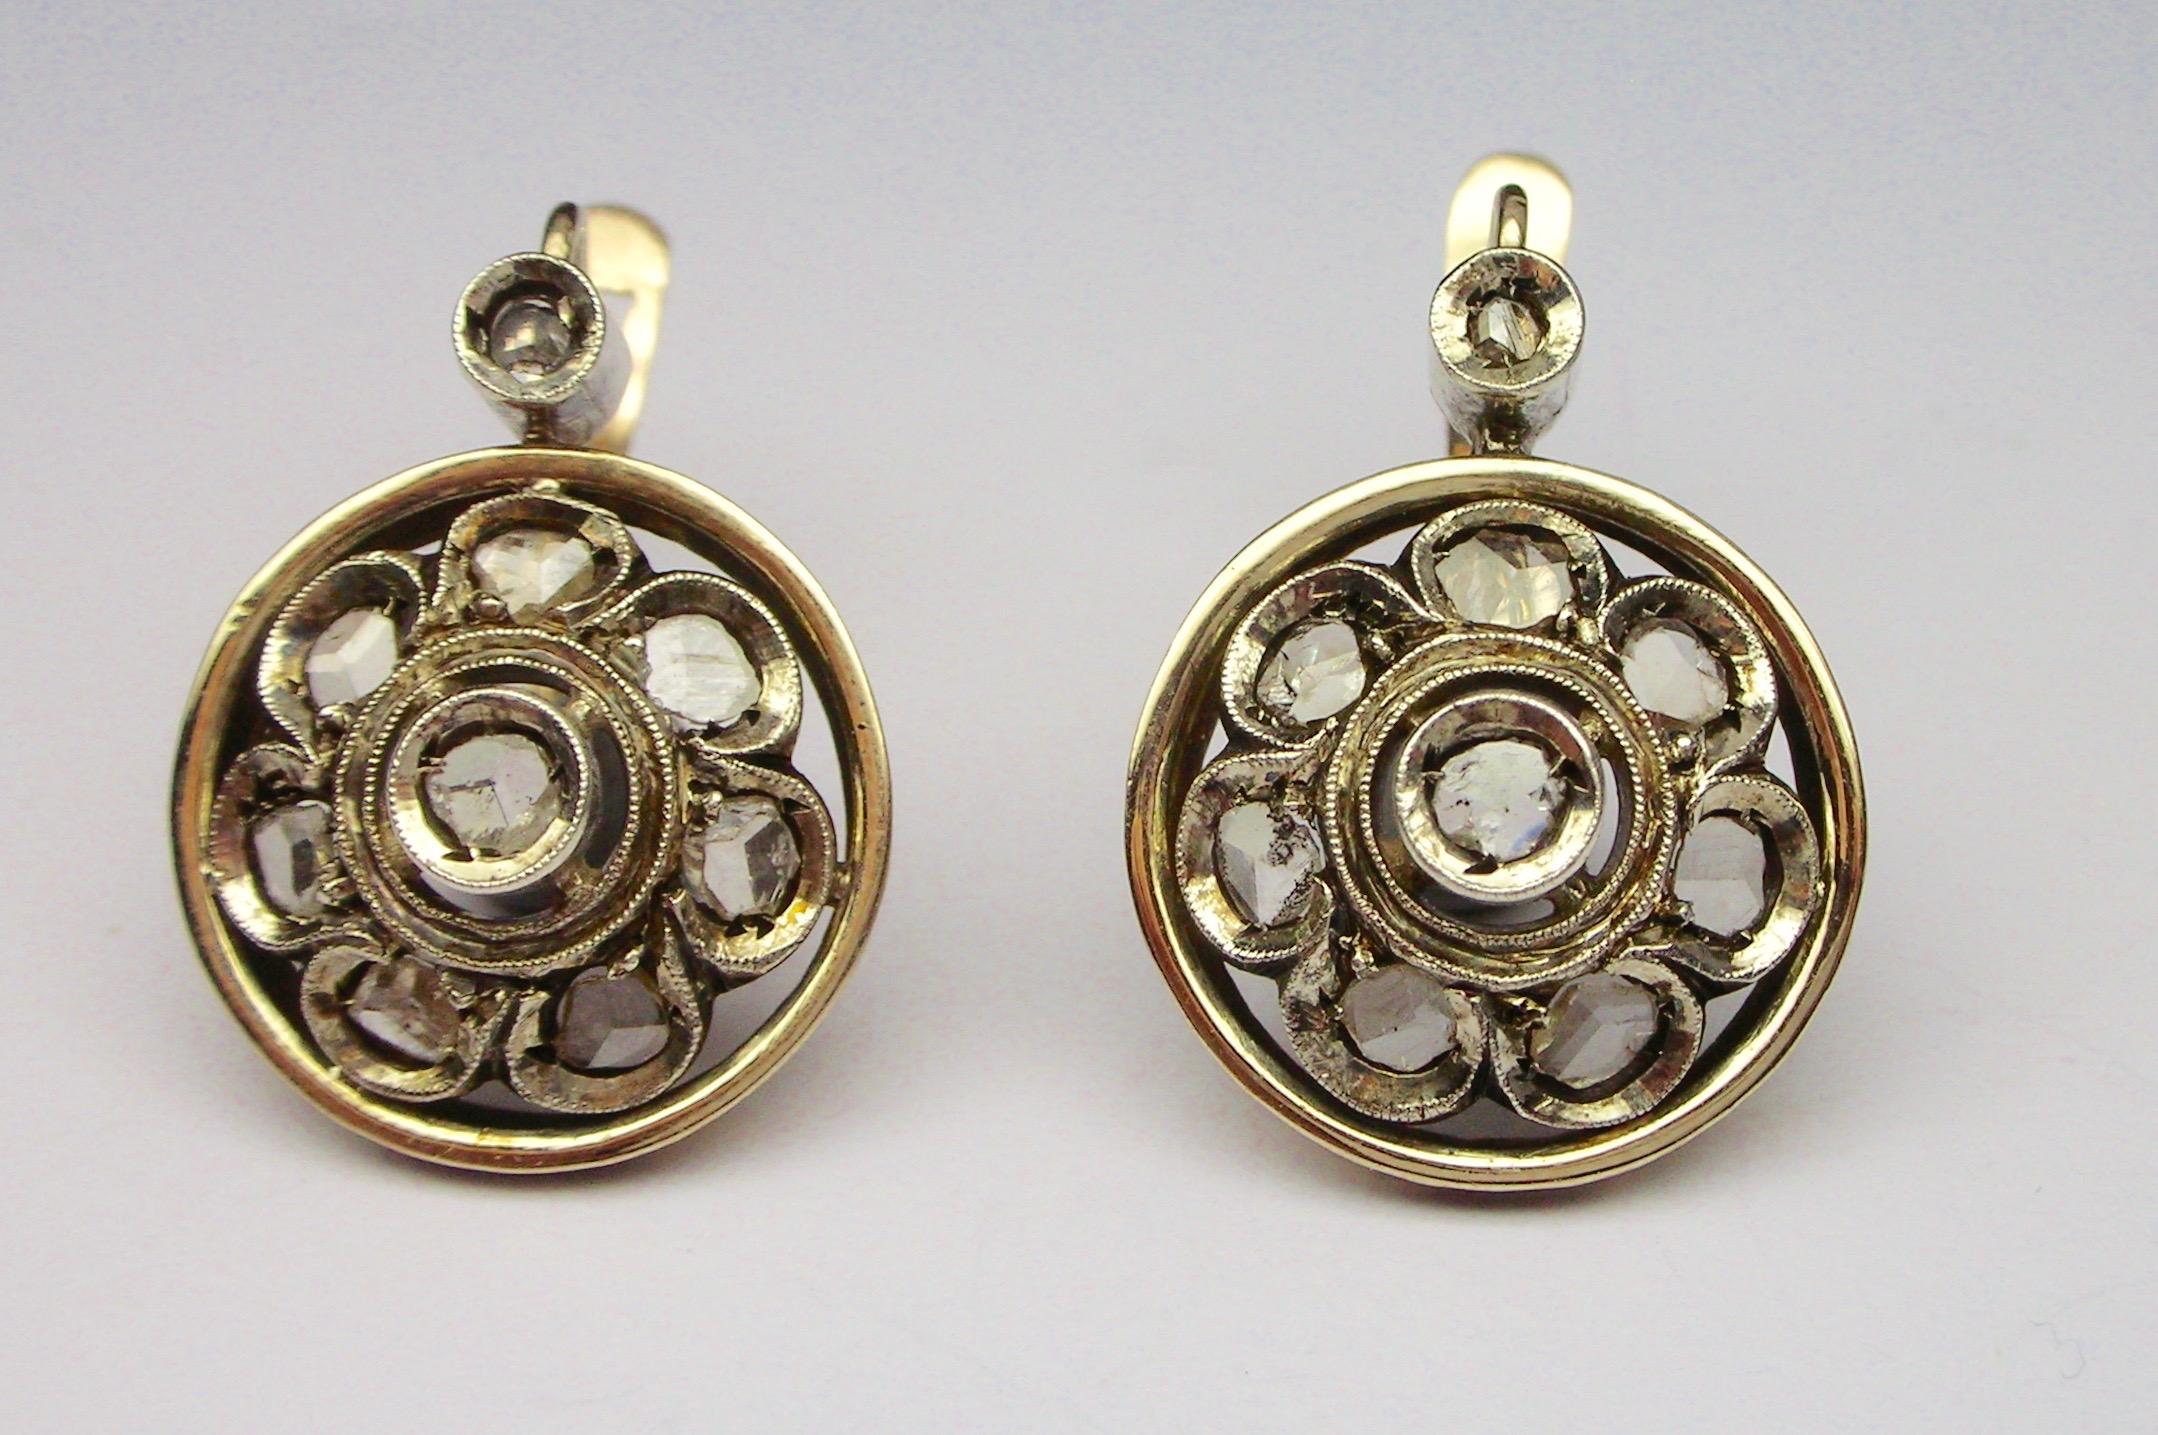 Italian earrings in gold and silver with rose cut diamonds. With a lever back fastening, from the end of the 18th Century.